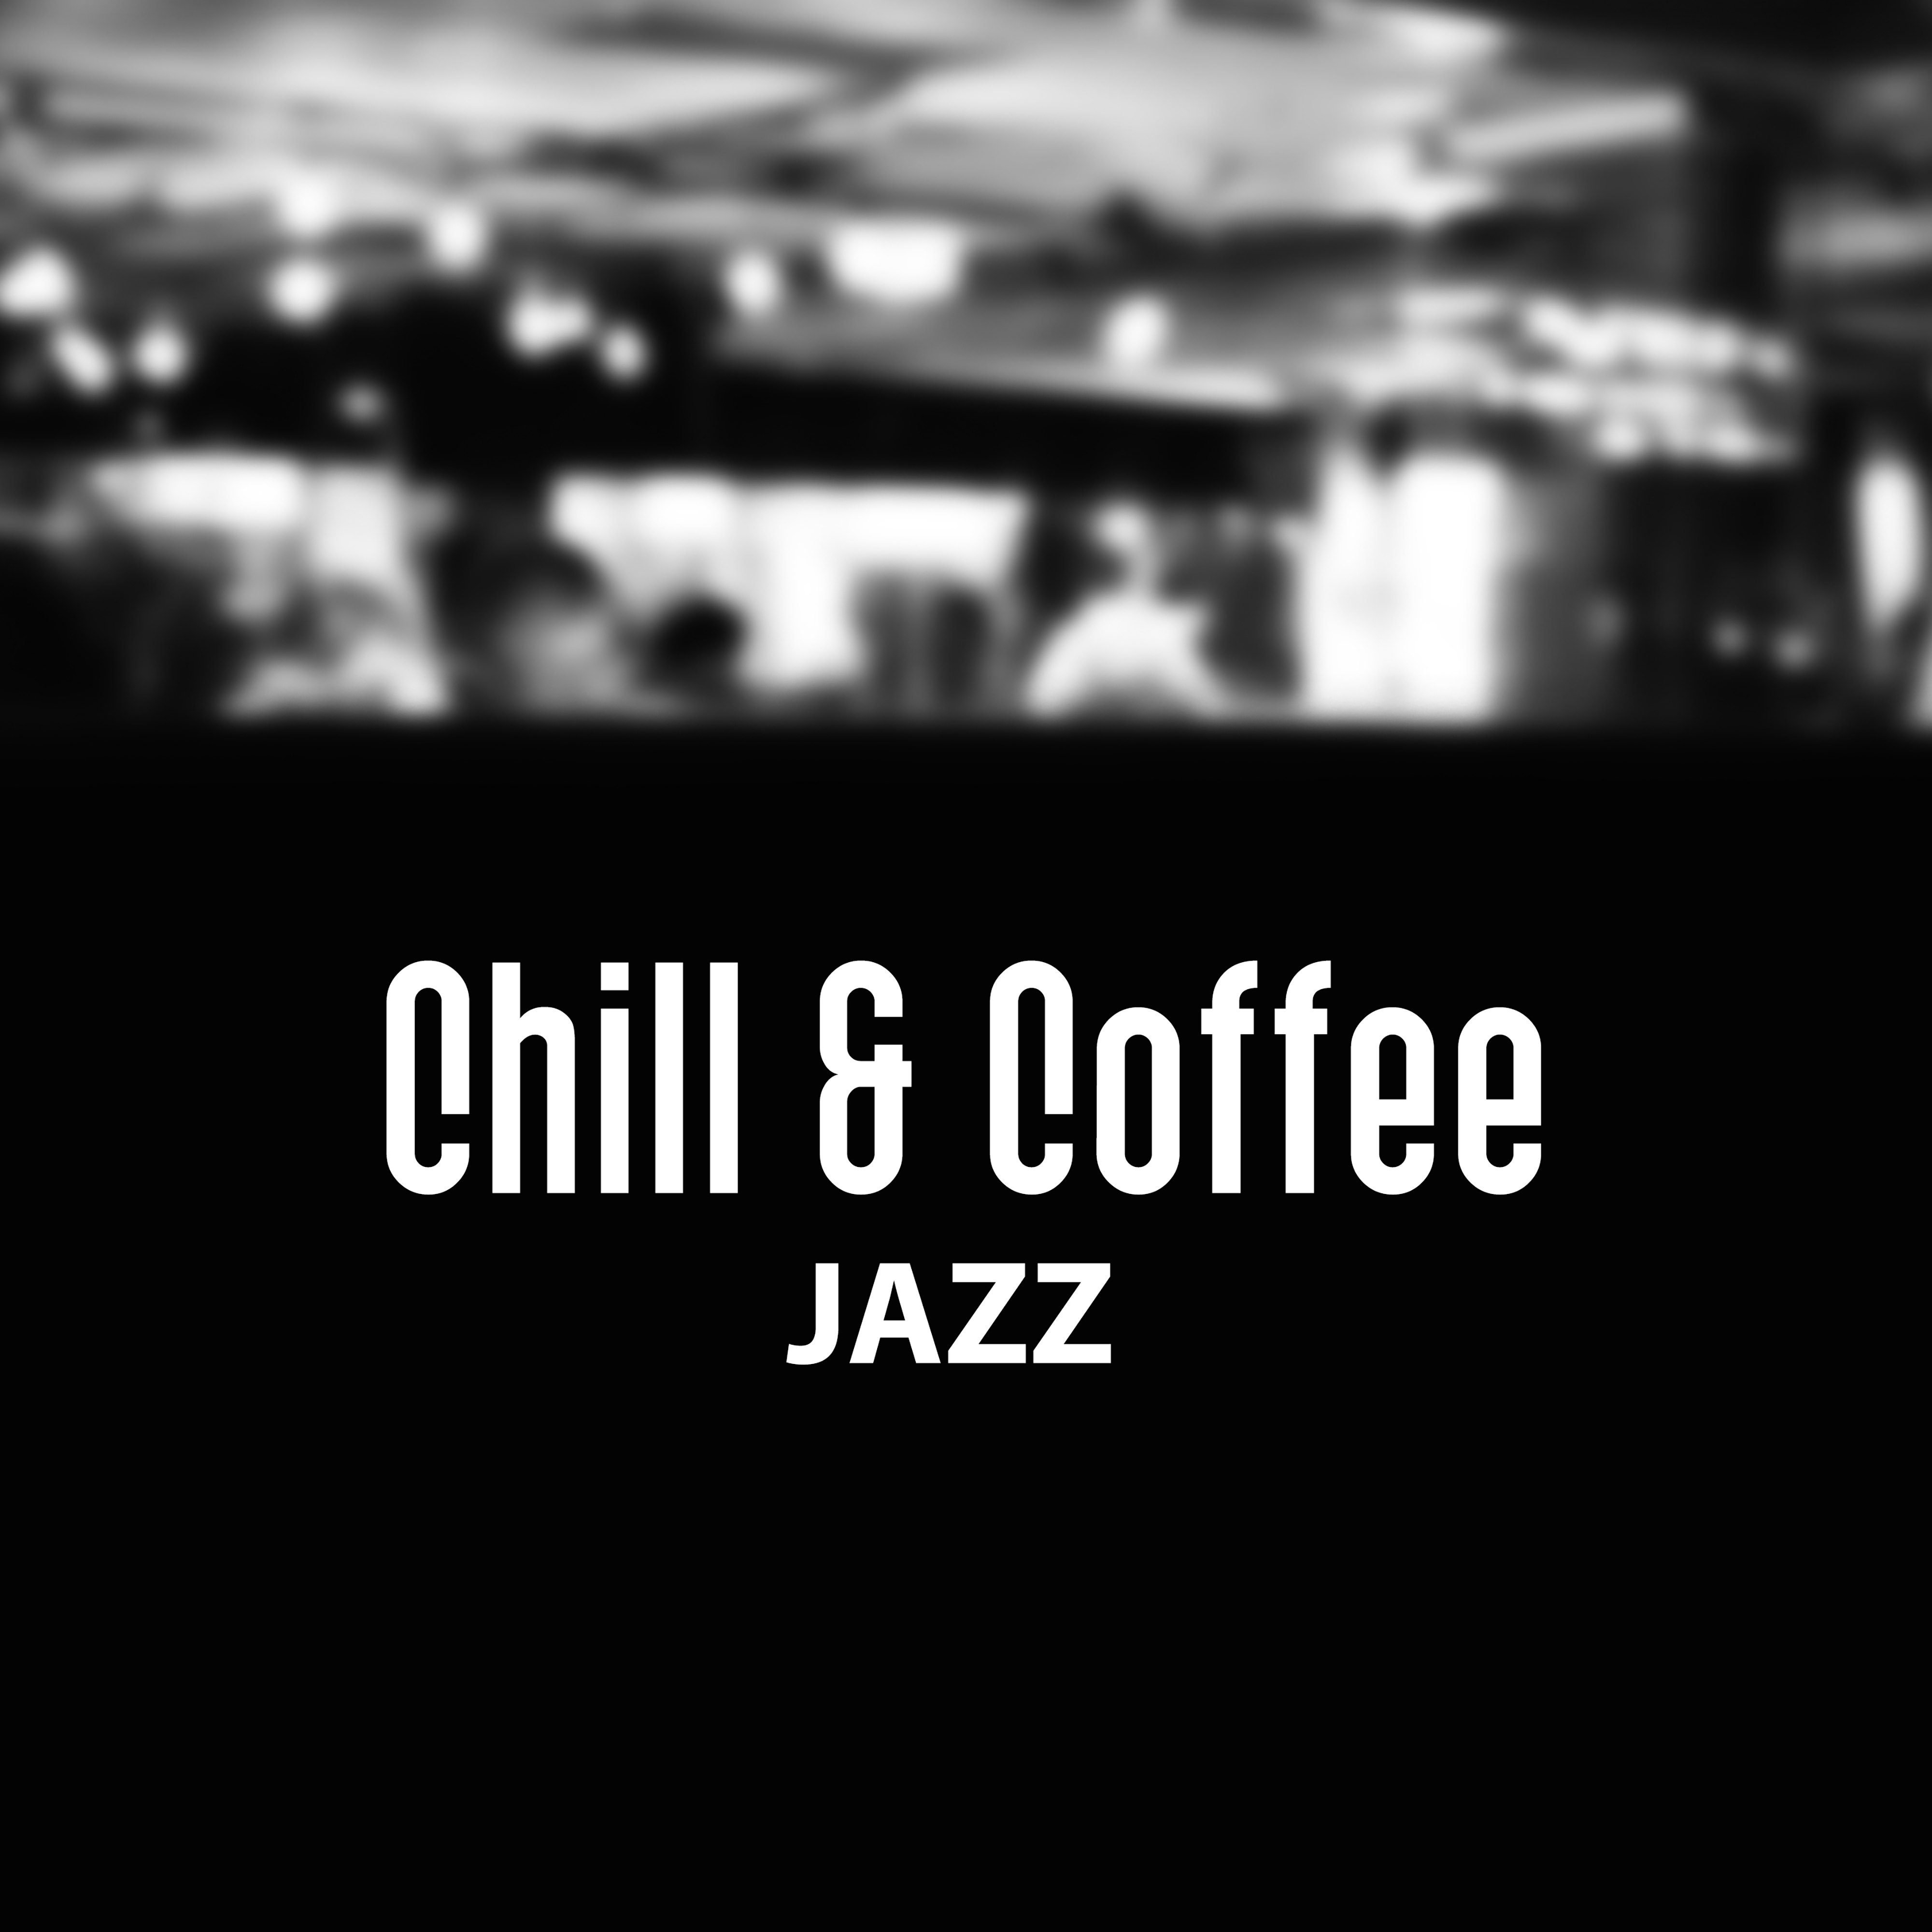 Chill & Coffee Jazz – Mellow Jazz Music, Soft Instrumental Sounds, Easy Listening Piano, Chilled Jazz